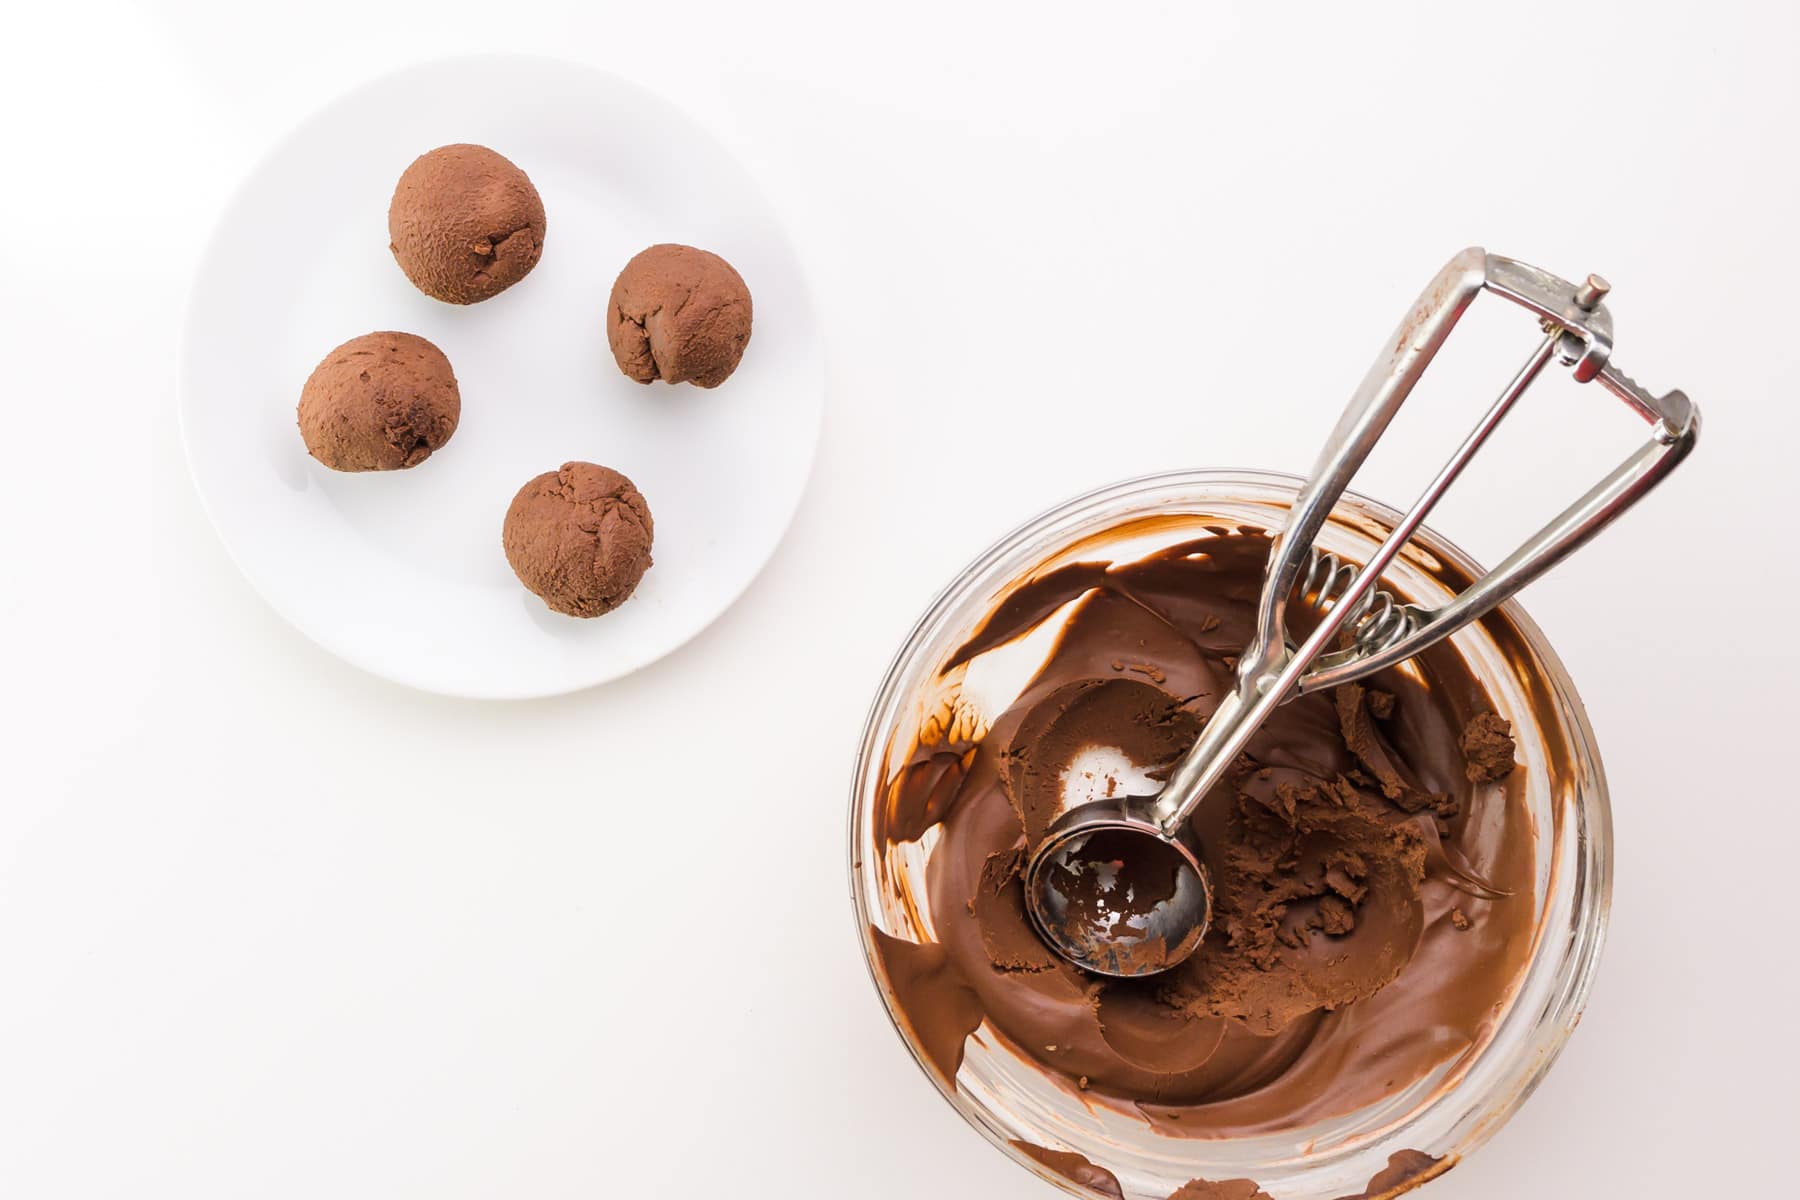 Chocolate ganache balls sit on a white plate next to a bowl of chocolate with a cookie dispenser in it